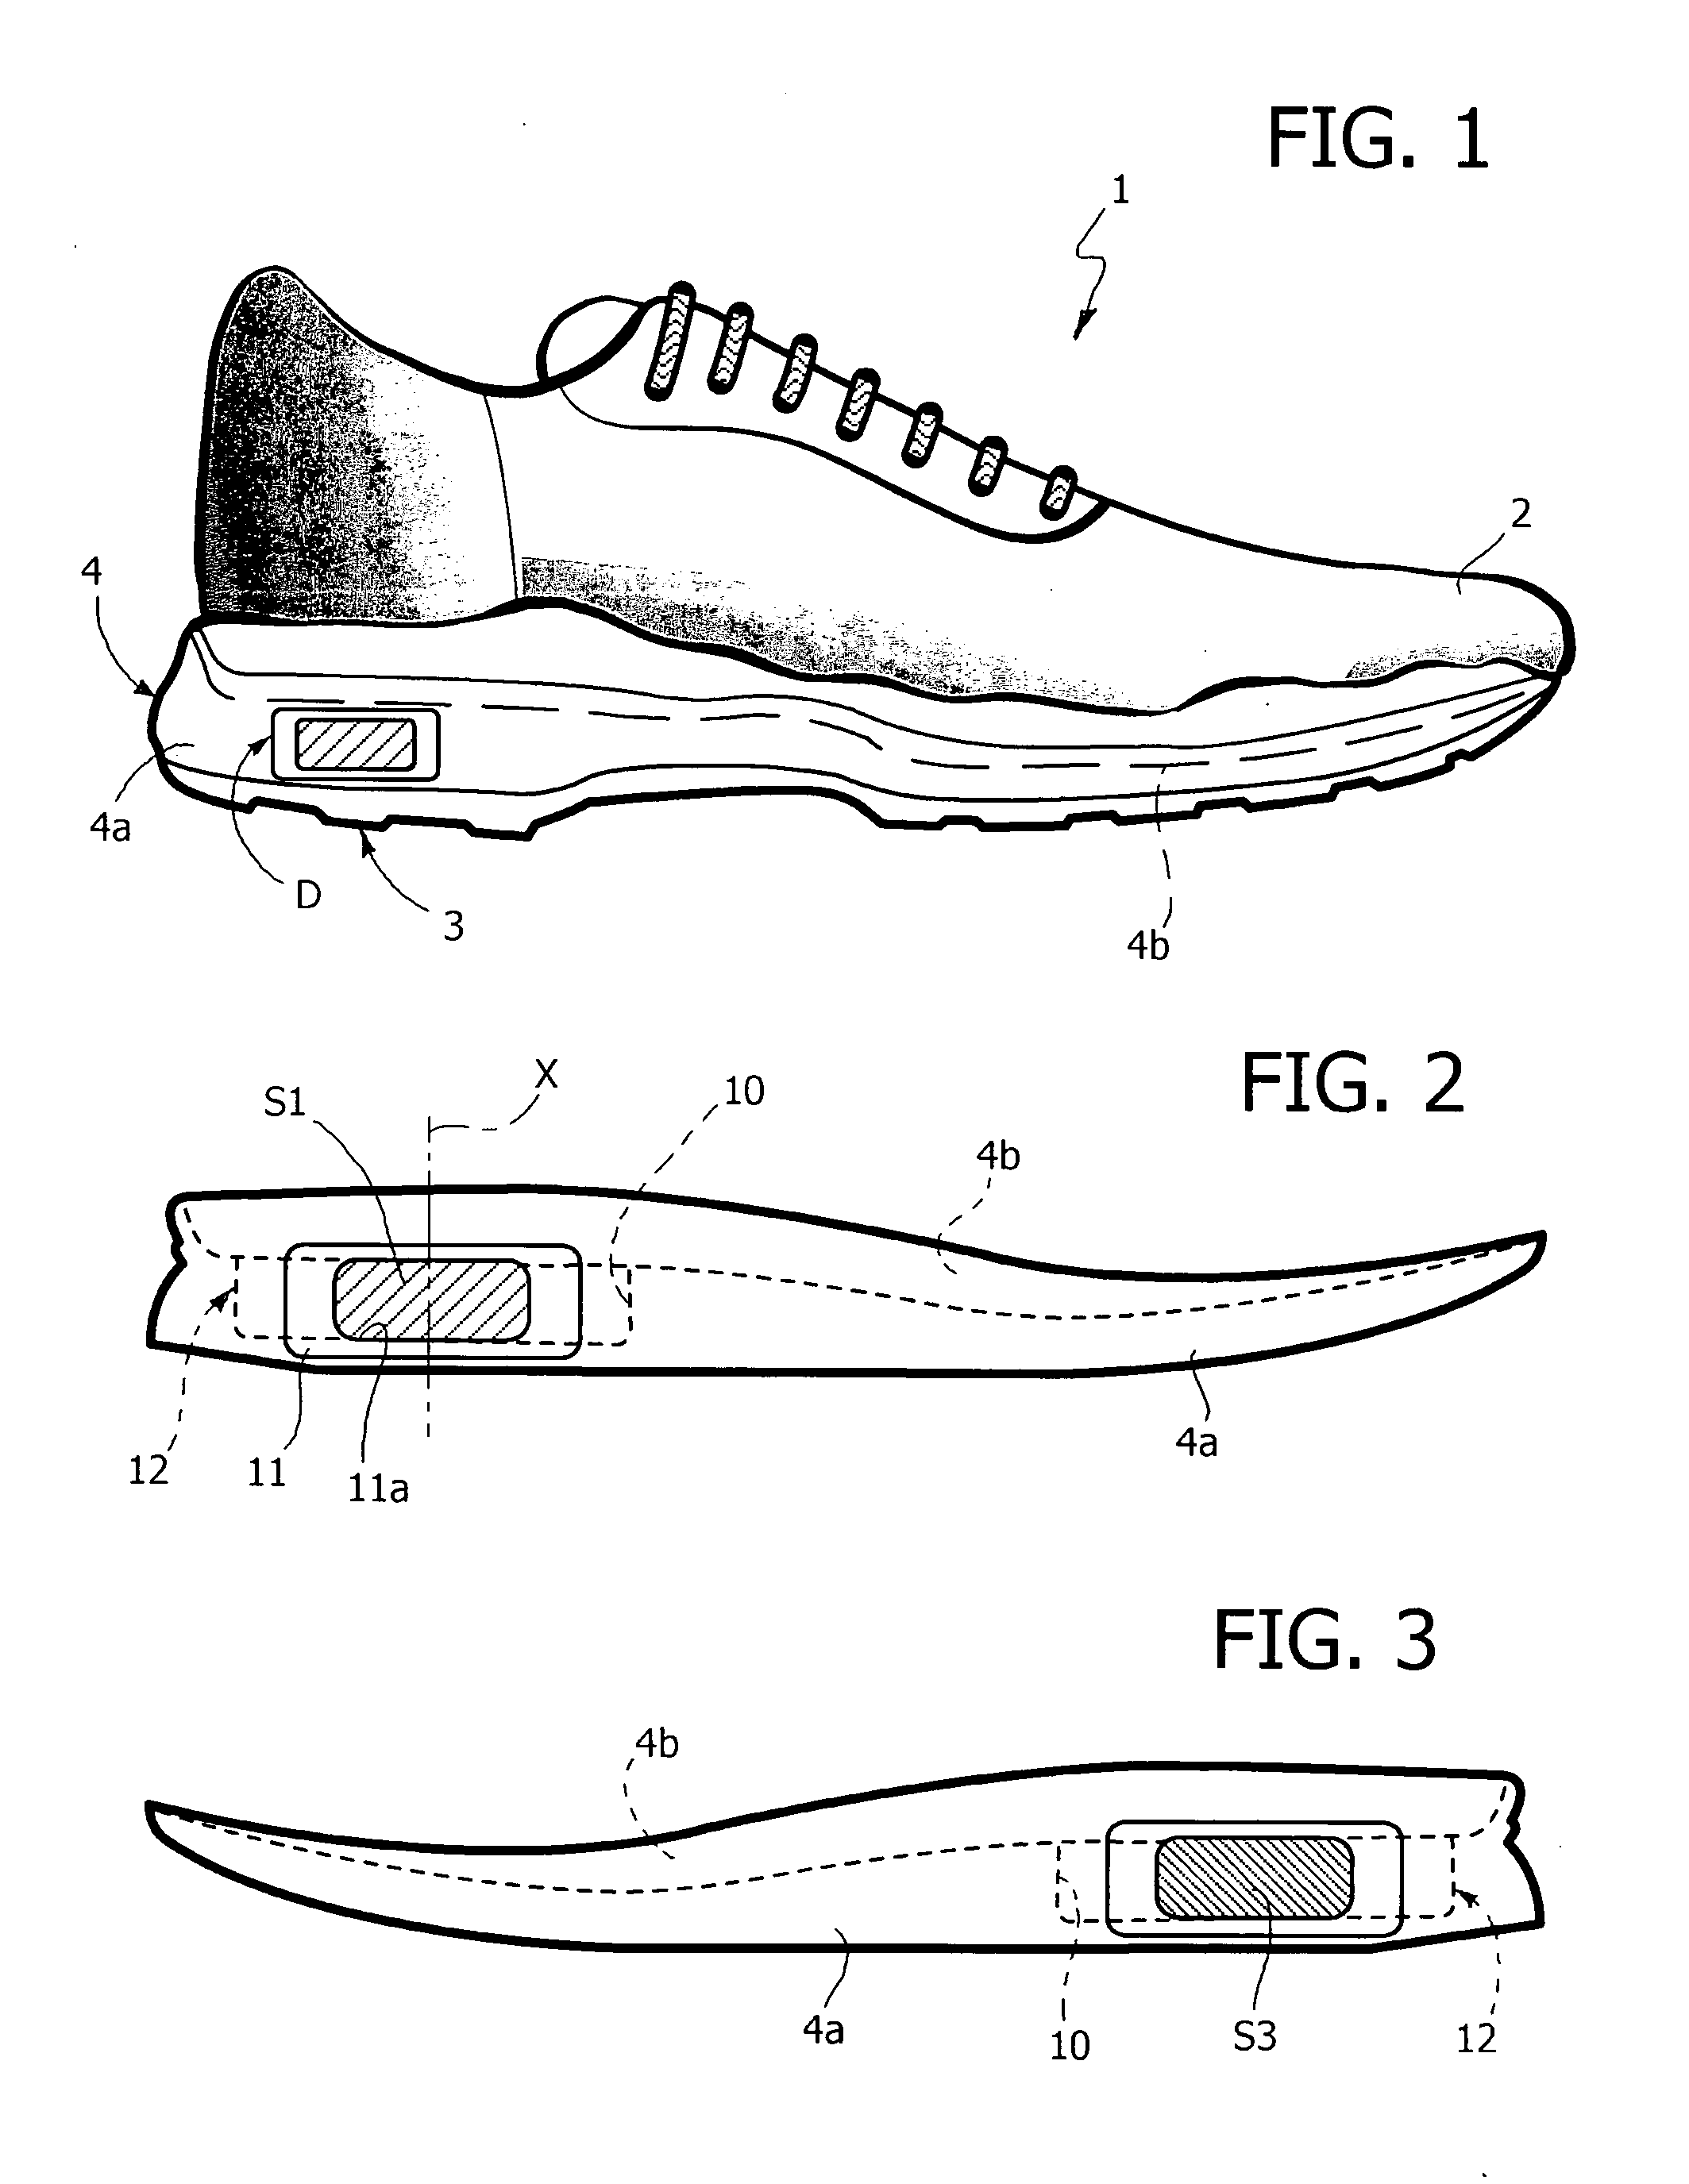 Footwear with an adjustable stabilizing system, in particular for pronation and/or supination control